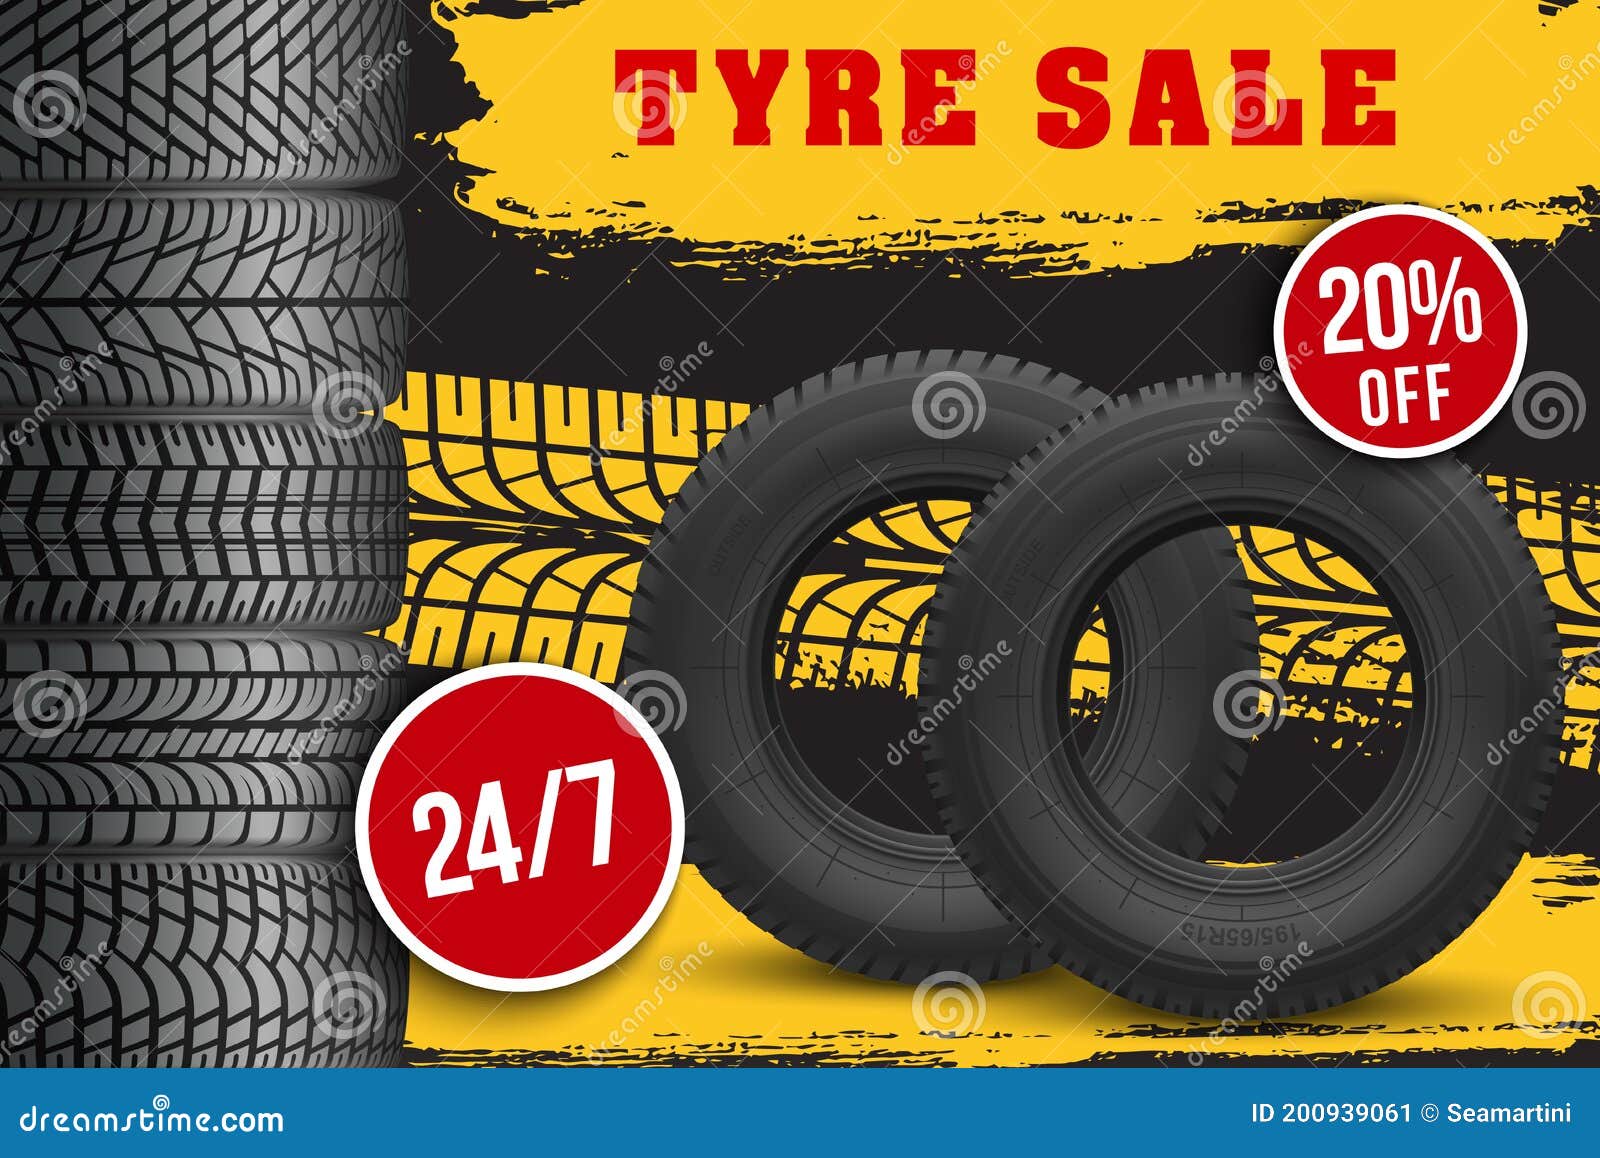 Tyre Sale Vector Store Promo Poster With 21d Tires Stock Vector For Tire Shop Tread